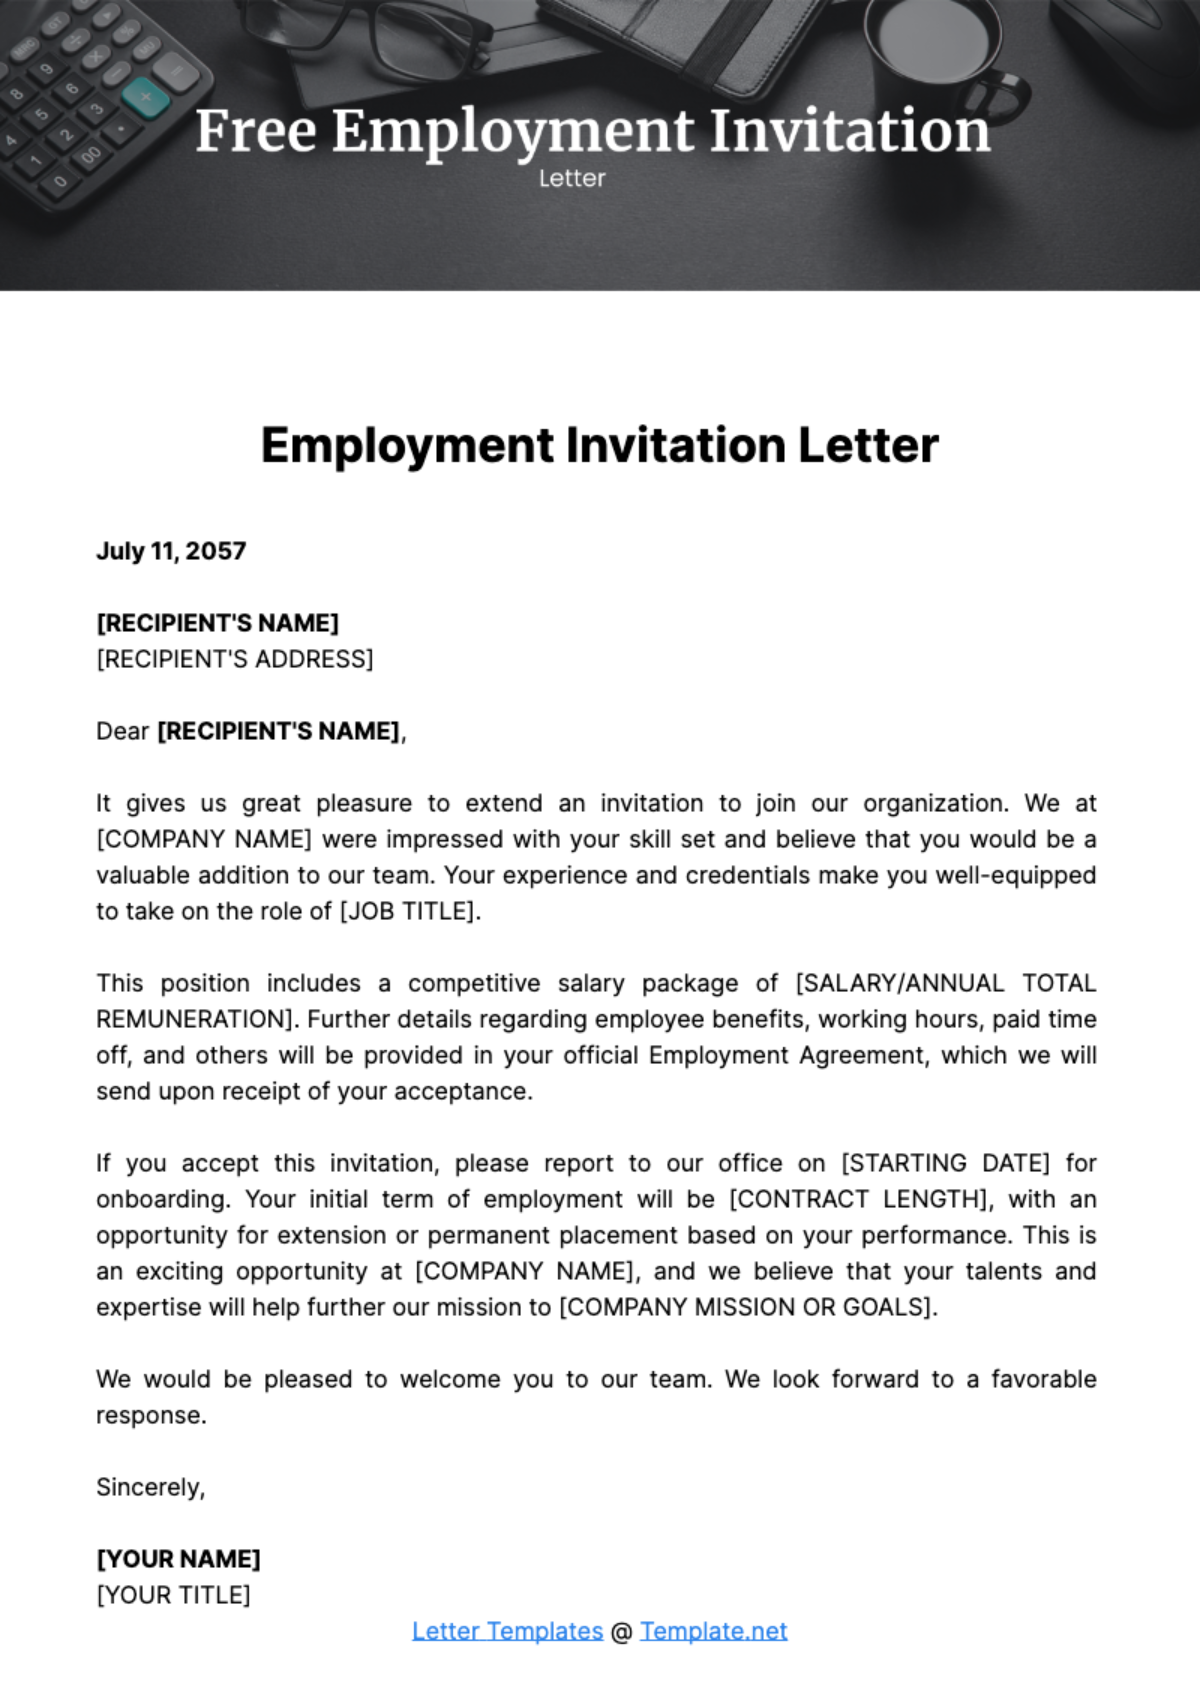 Free Employment Invitation Letter Template